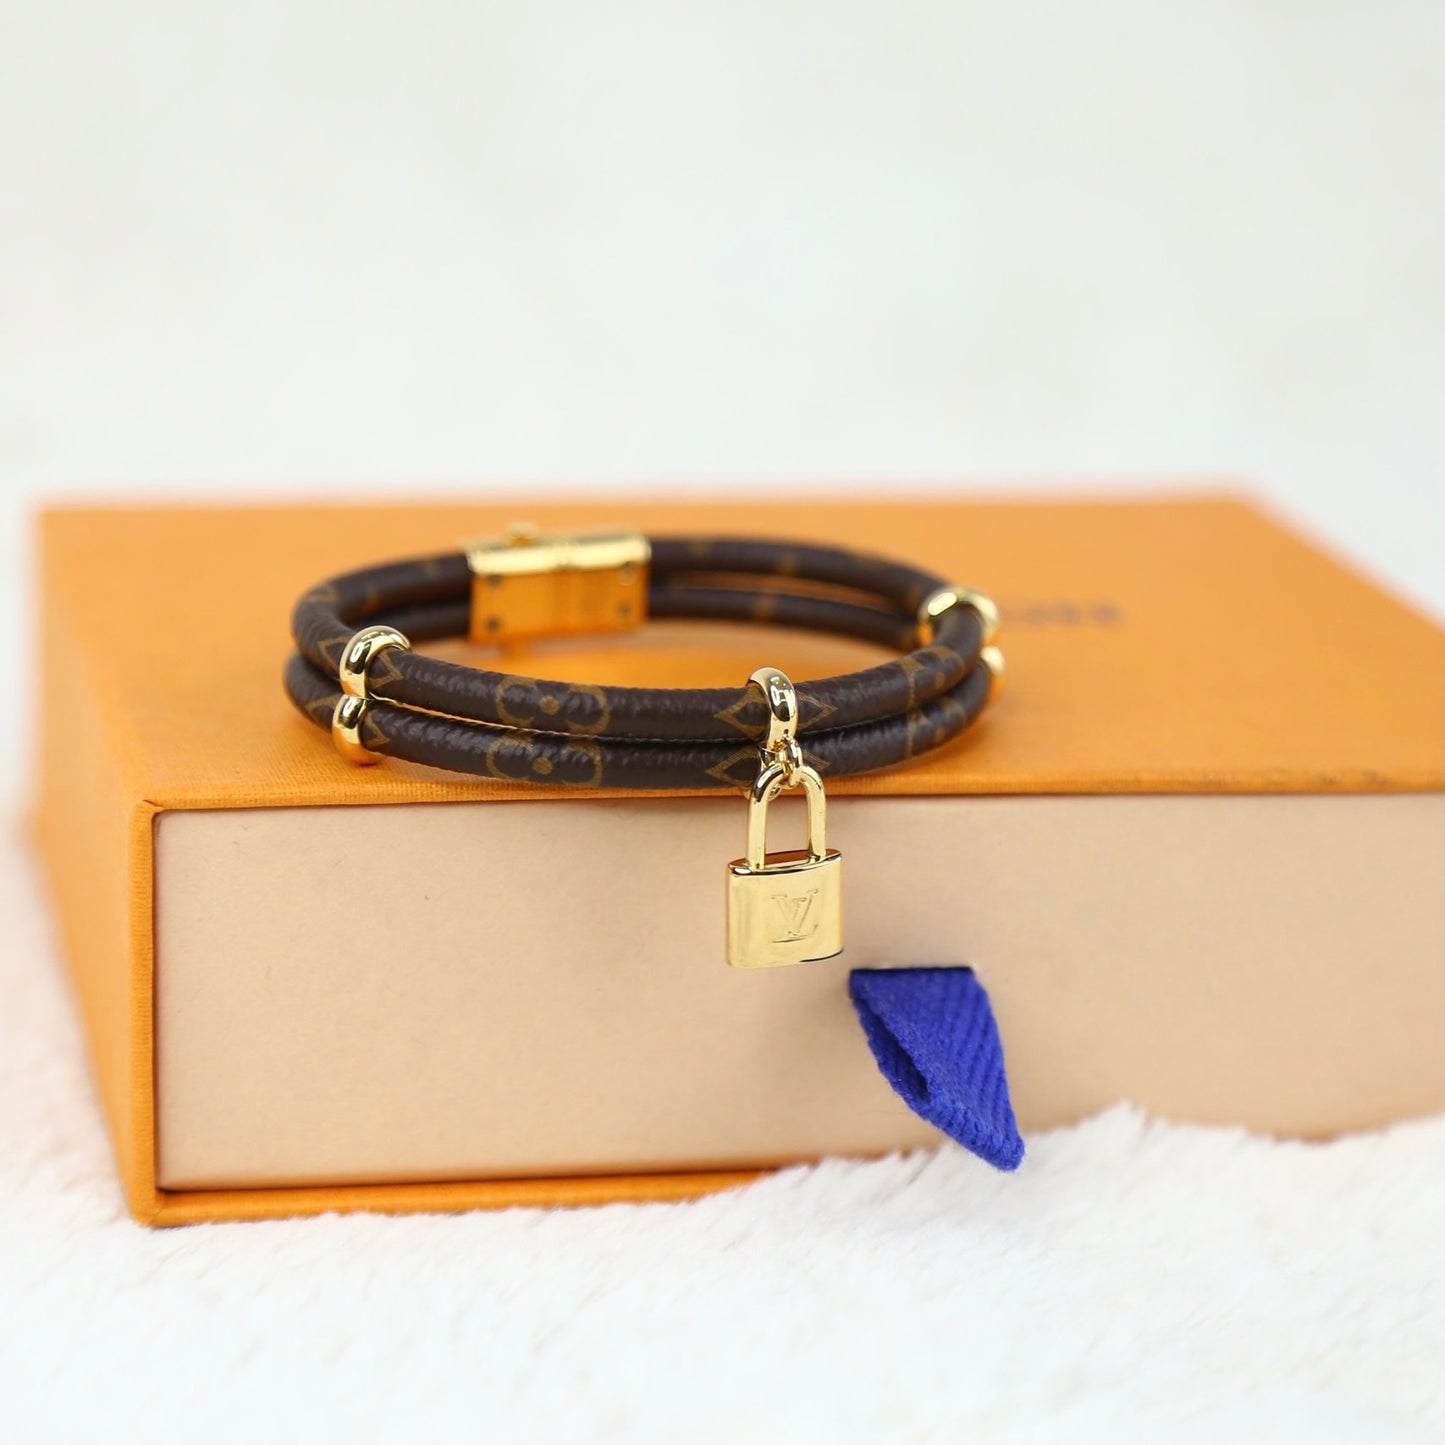 Shop Louis Vuitton Bangles Costume Jewelry Unisex Leather Bracelets  (M8124F, M8011E, M8048E, M6220F, M6758E, M6442F, M6451F) by naganon